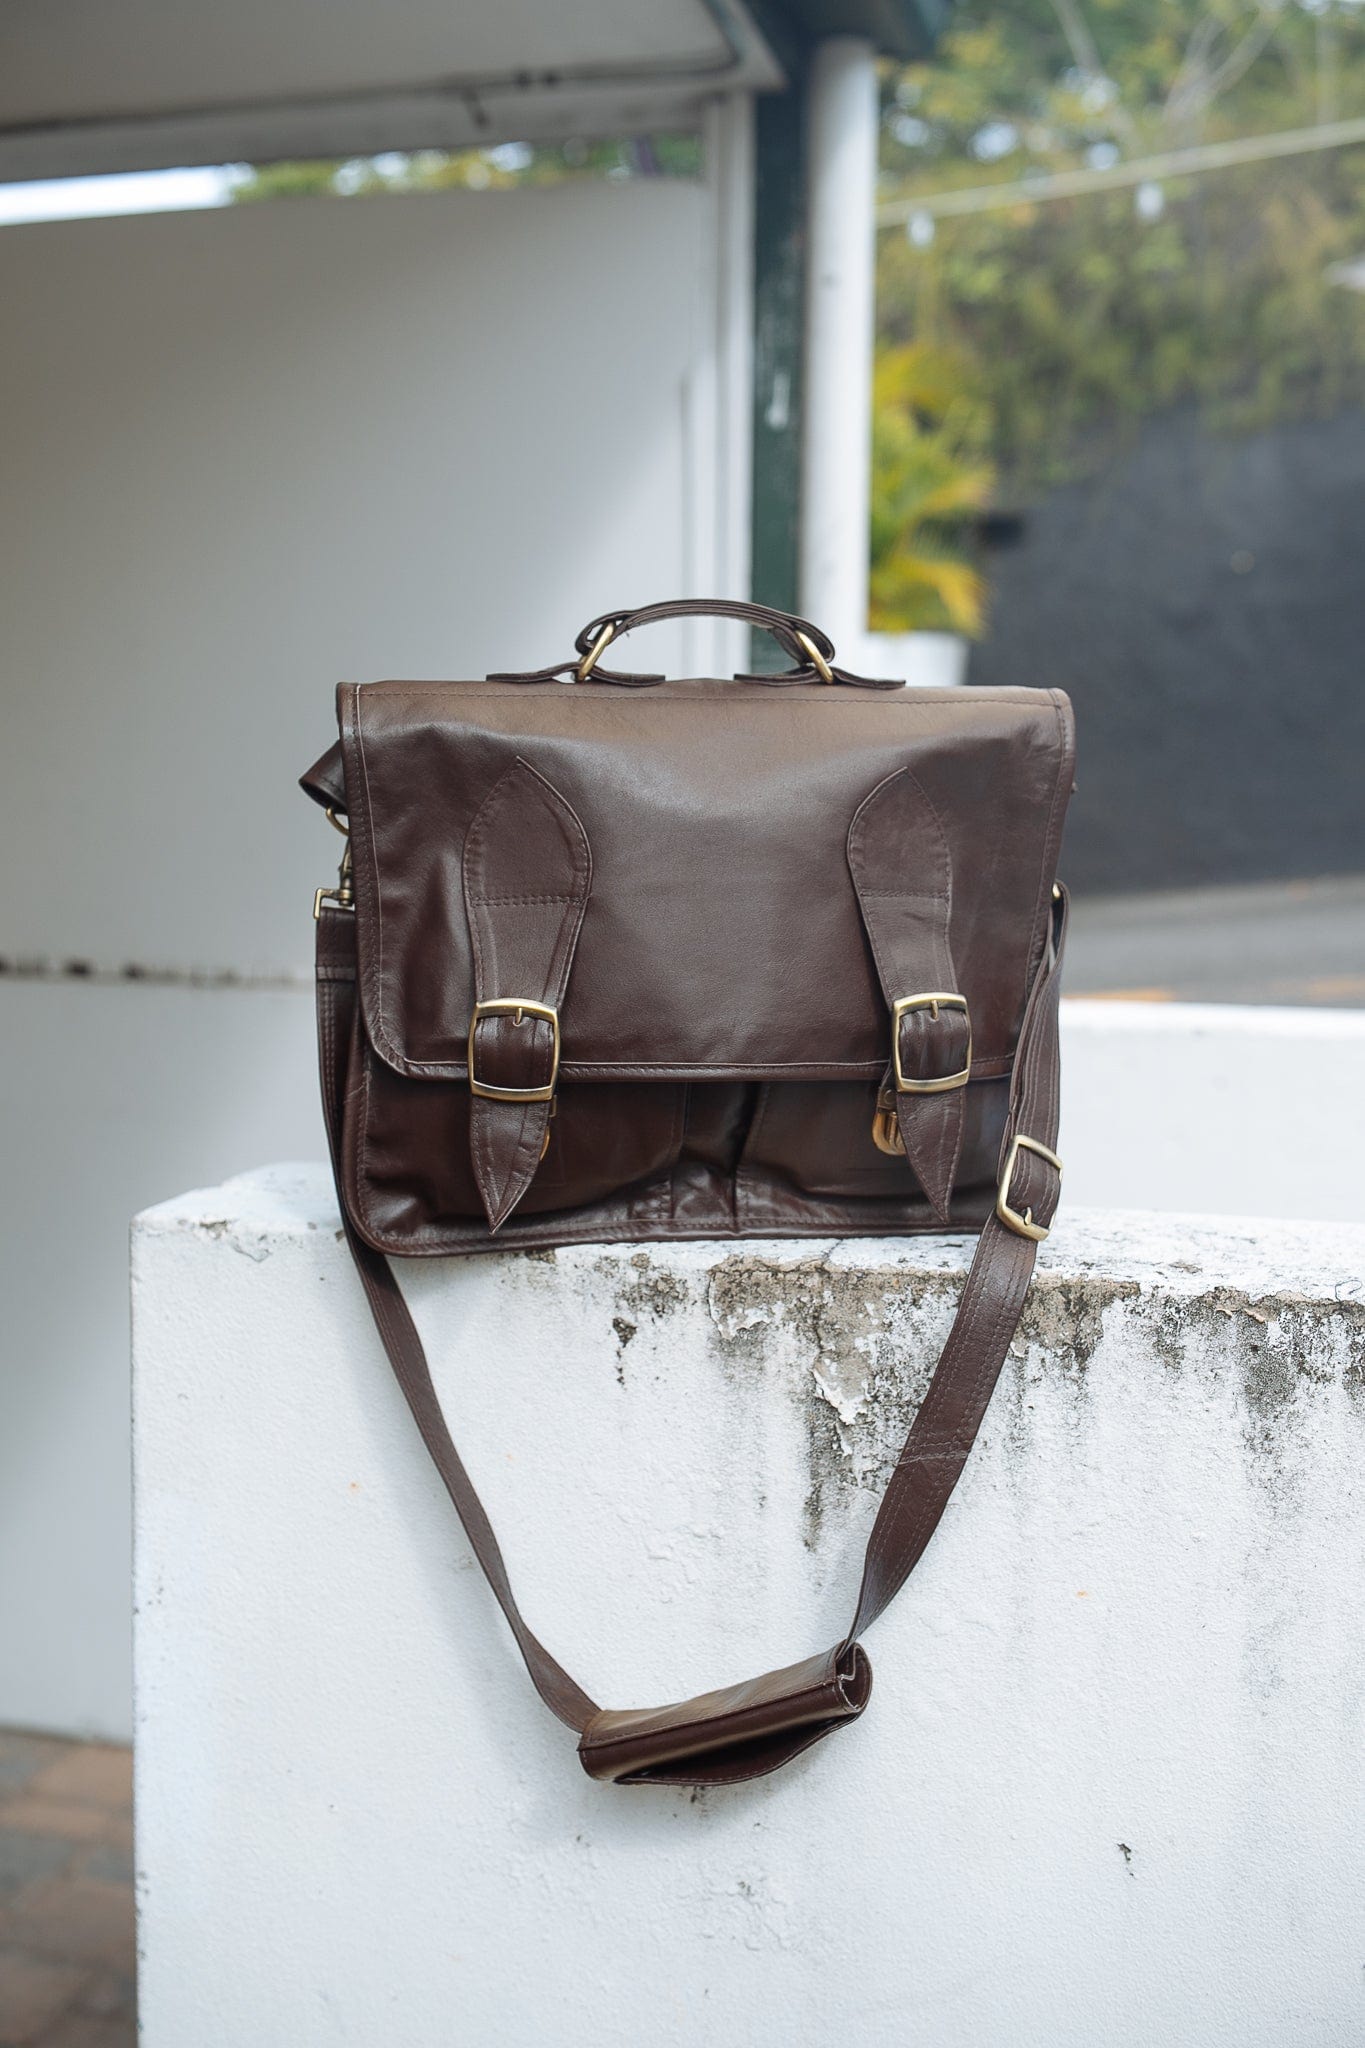 The Real McCaul Briefcases Briefcase (2 Partition) Australian Made Australian Owned Kangaroo Leather Briefcase Shoulder Bag Satchel Made in Australia